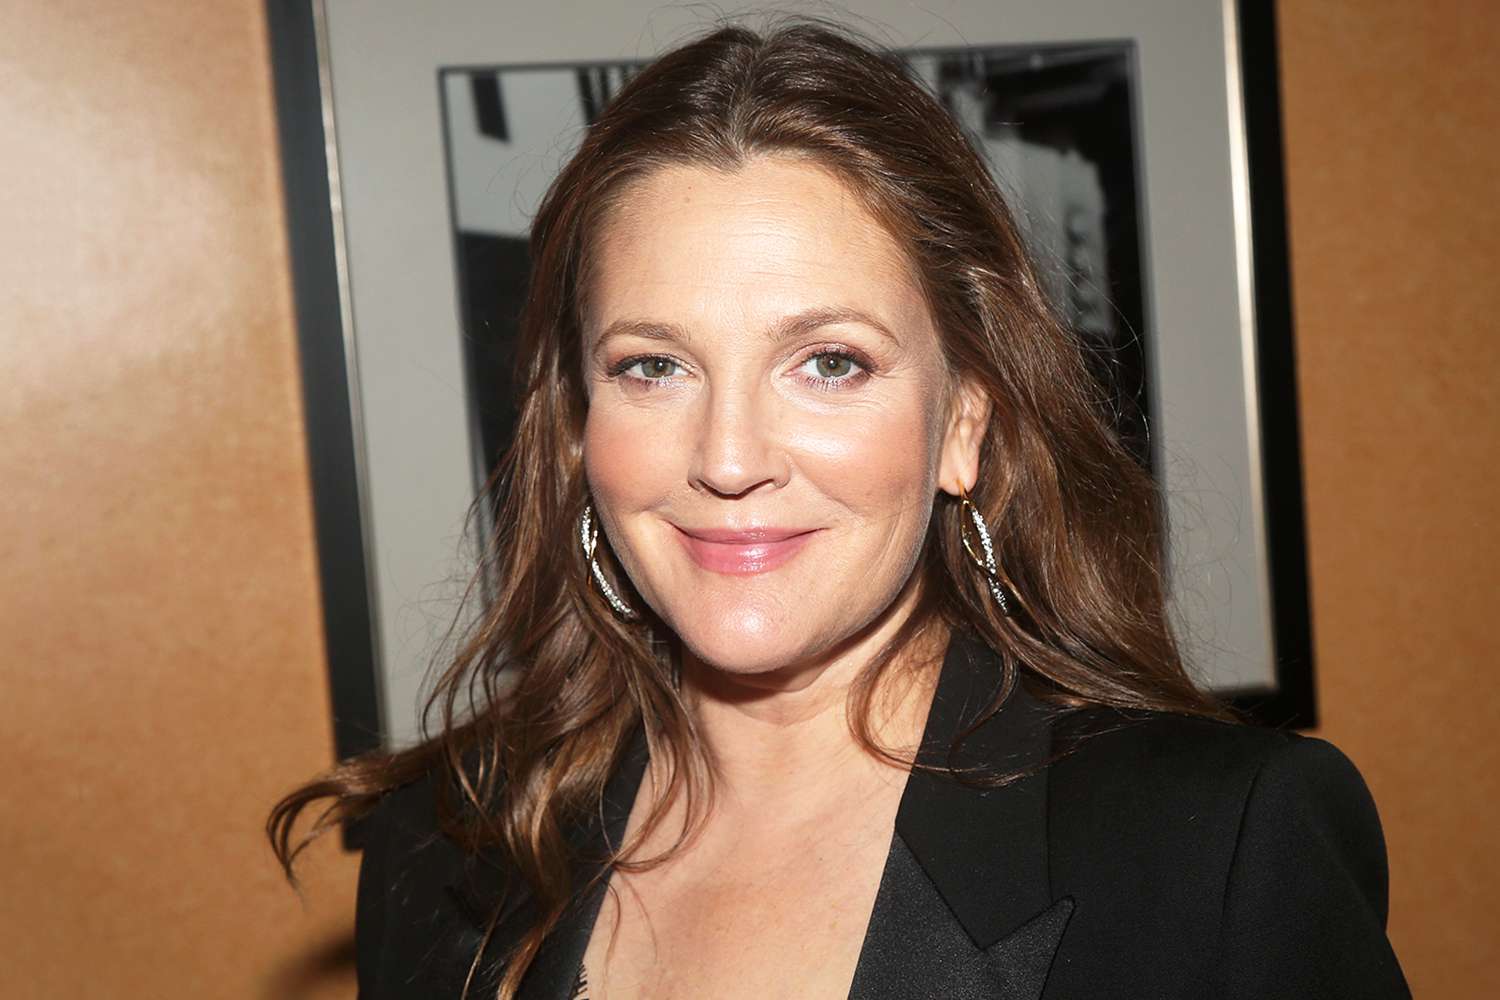 Drew Barrymore Once Thought She Was Going to Get Murdered on a First Date: 'I Was Really Afraid'